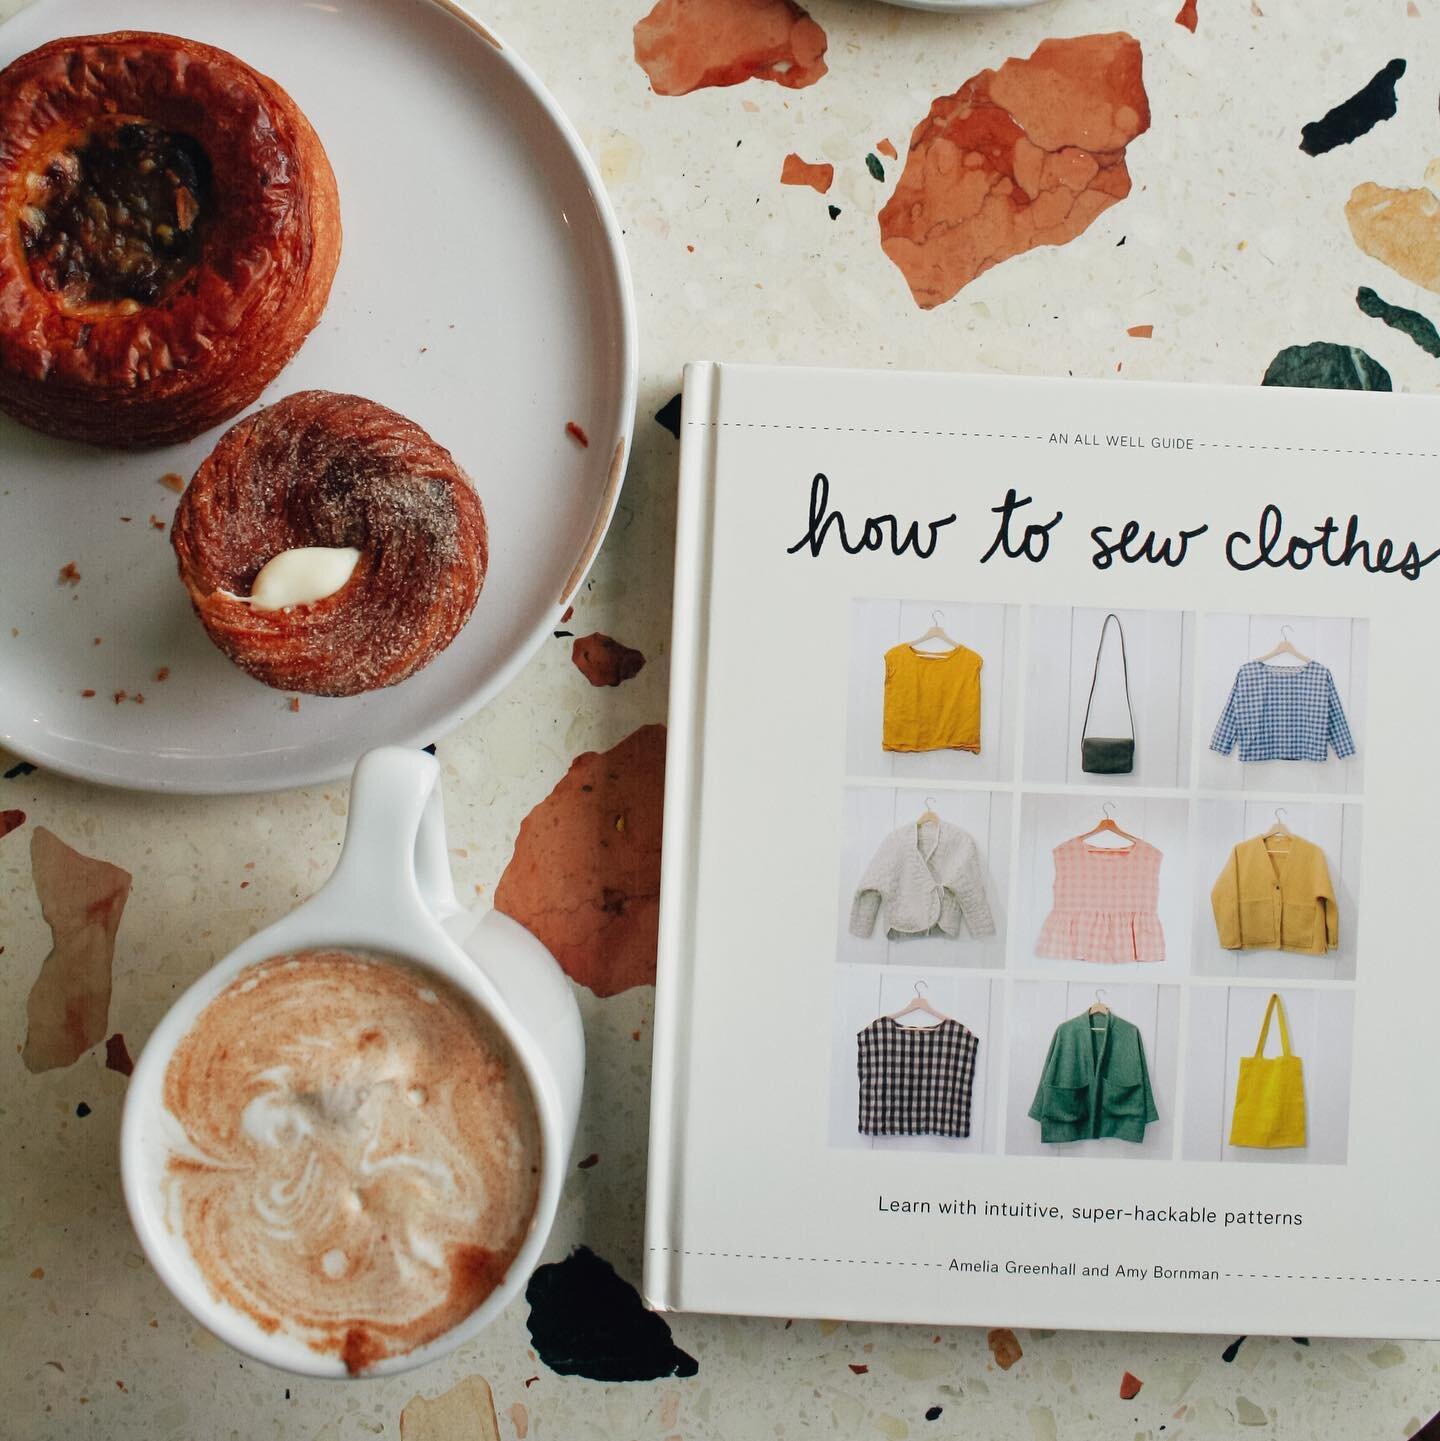 🌼🌼🌼How to Sew Clothes is out TODAY! 🌼🌼🌼Huge thank you to all who preordered and helped spread the word about this book. We really can&rsquo;t wait for you to read it, and we&rsquo;re so excited that it&rsquo;s finally out in the world! 🎉

The 